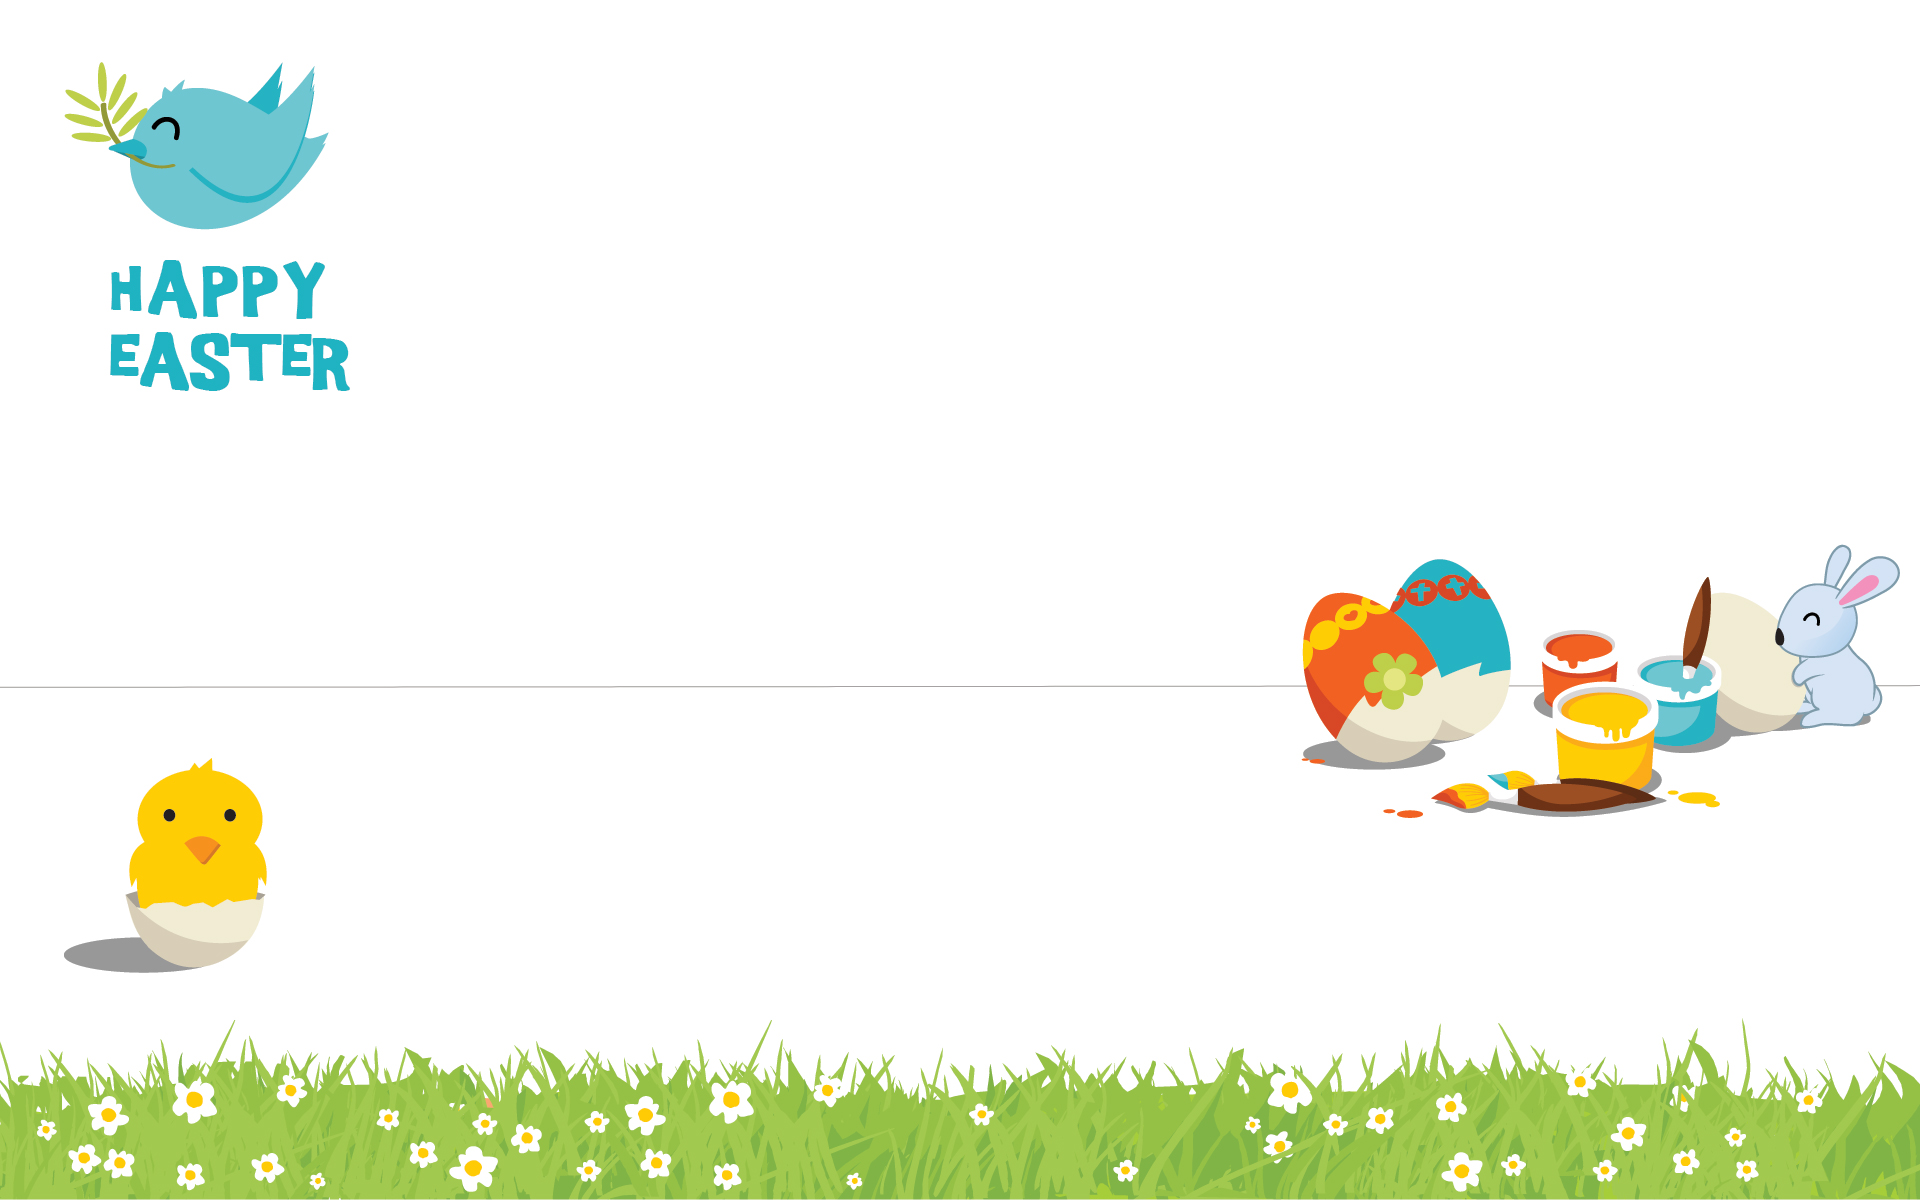 Easter Desktop Wallpaper Which Is Under The